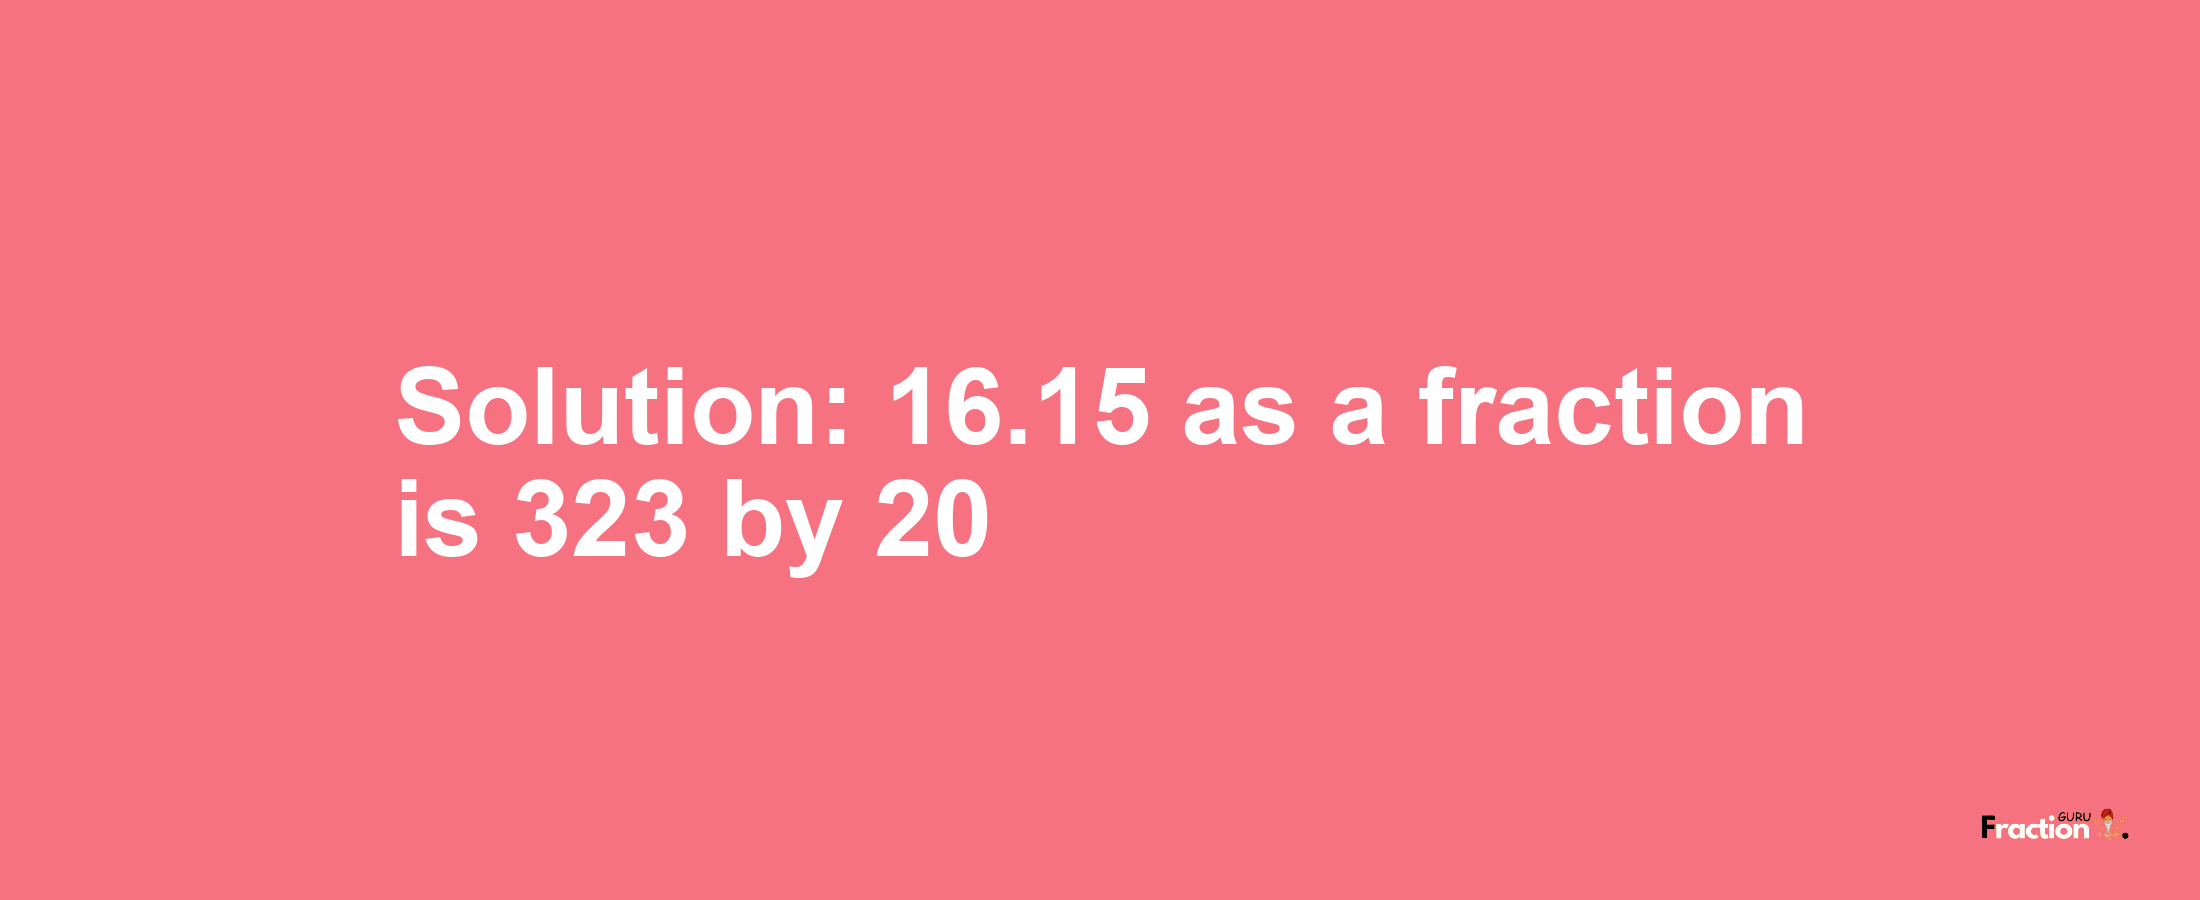 Solution:16.15 as a fraction is 323/20